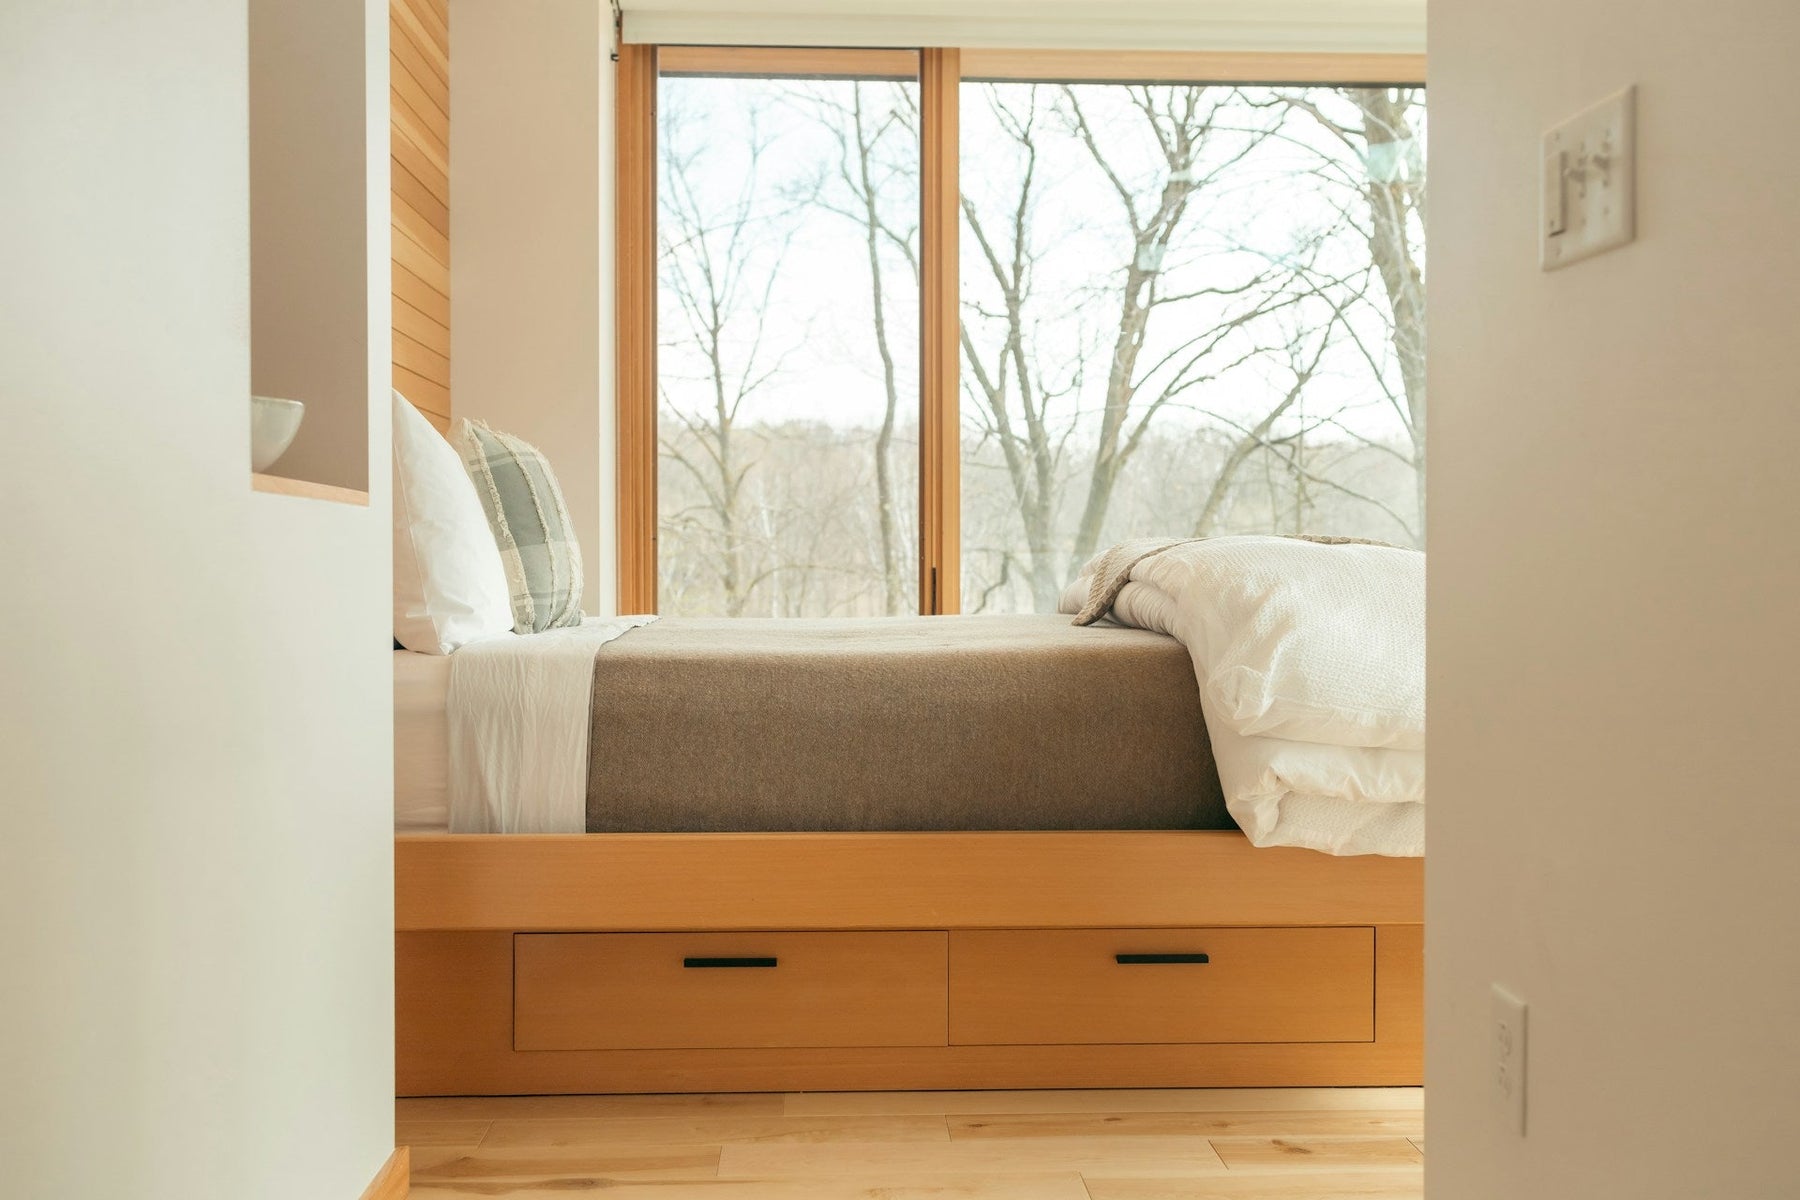 Kids Cabin Beds with Storage: The Stylish & Functional Option - Rest Relax